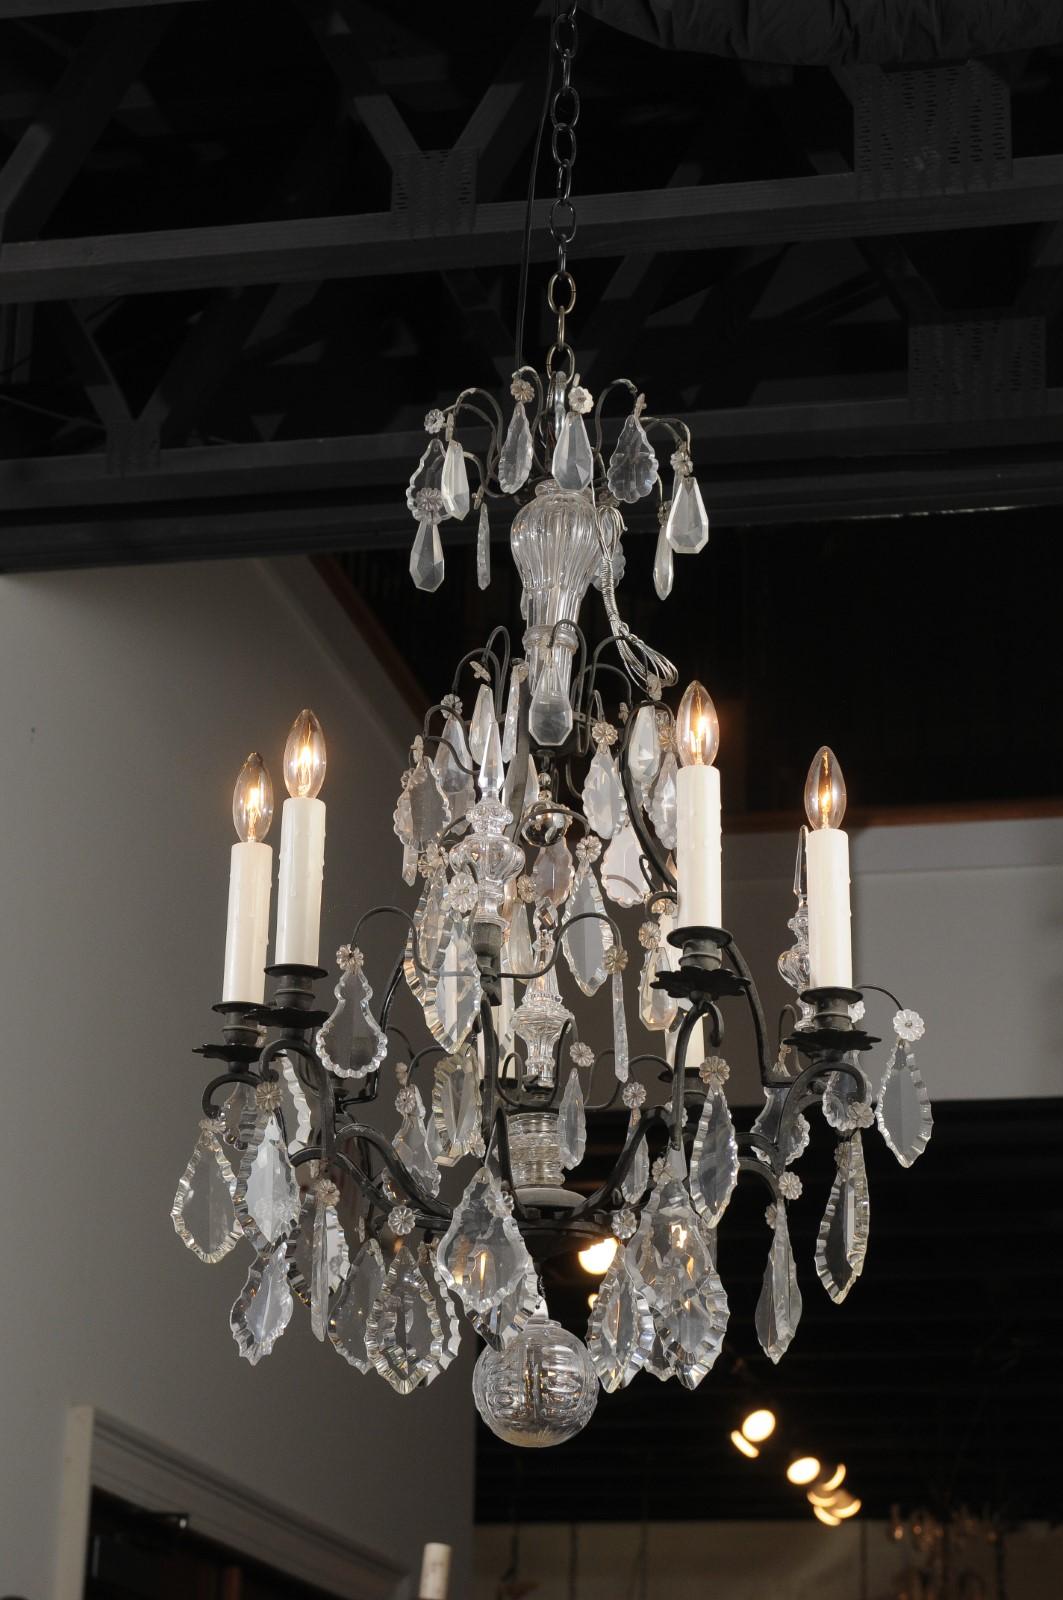 A French six-light iron and crystal chandelier from the 19th century, with pendeloques and scrolled arms. Born in France during the 19th century, this exquisite chandelier features an iron armature, accented with crystal details in the centre. Six